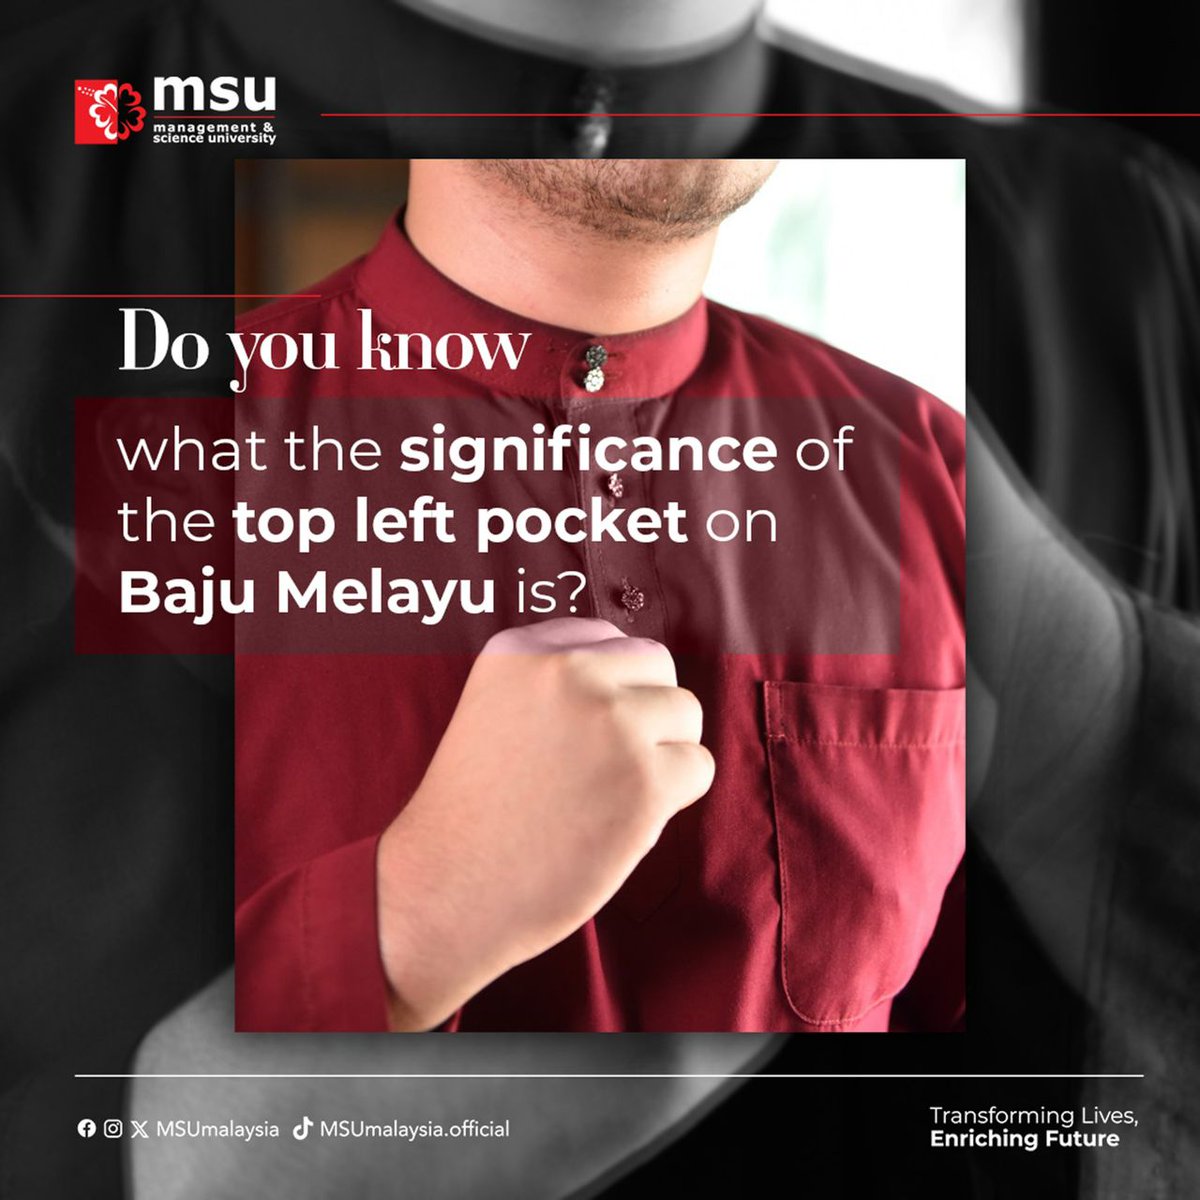 Baju Melayu has a significant meaning to its design, and our short film, Yang Hilang, has described it clearly. Do you know what it is? If yes, comment below. If you are unsure, click the link to watch now youtu.be/cquOrBzrZOA #MSUmalaysia  #MSURaya2024 #YangHilang